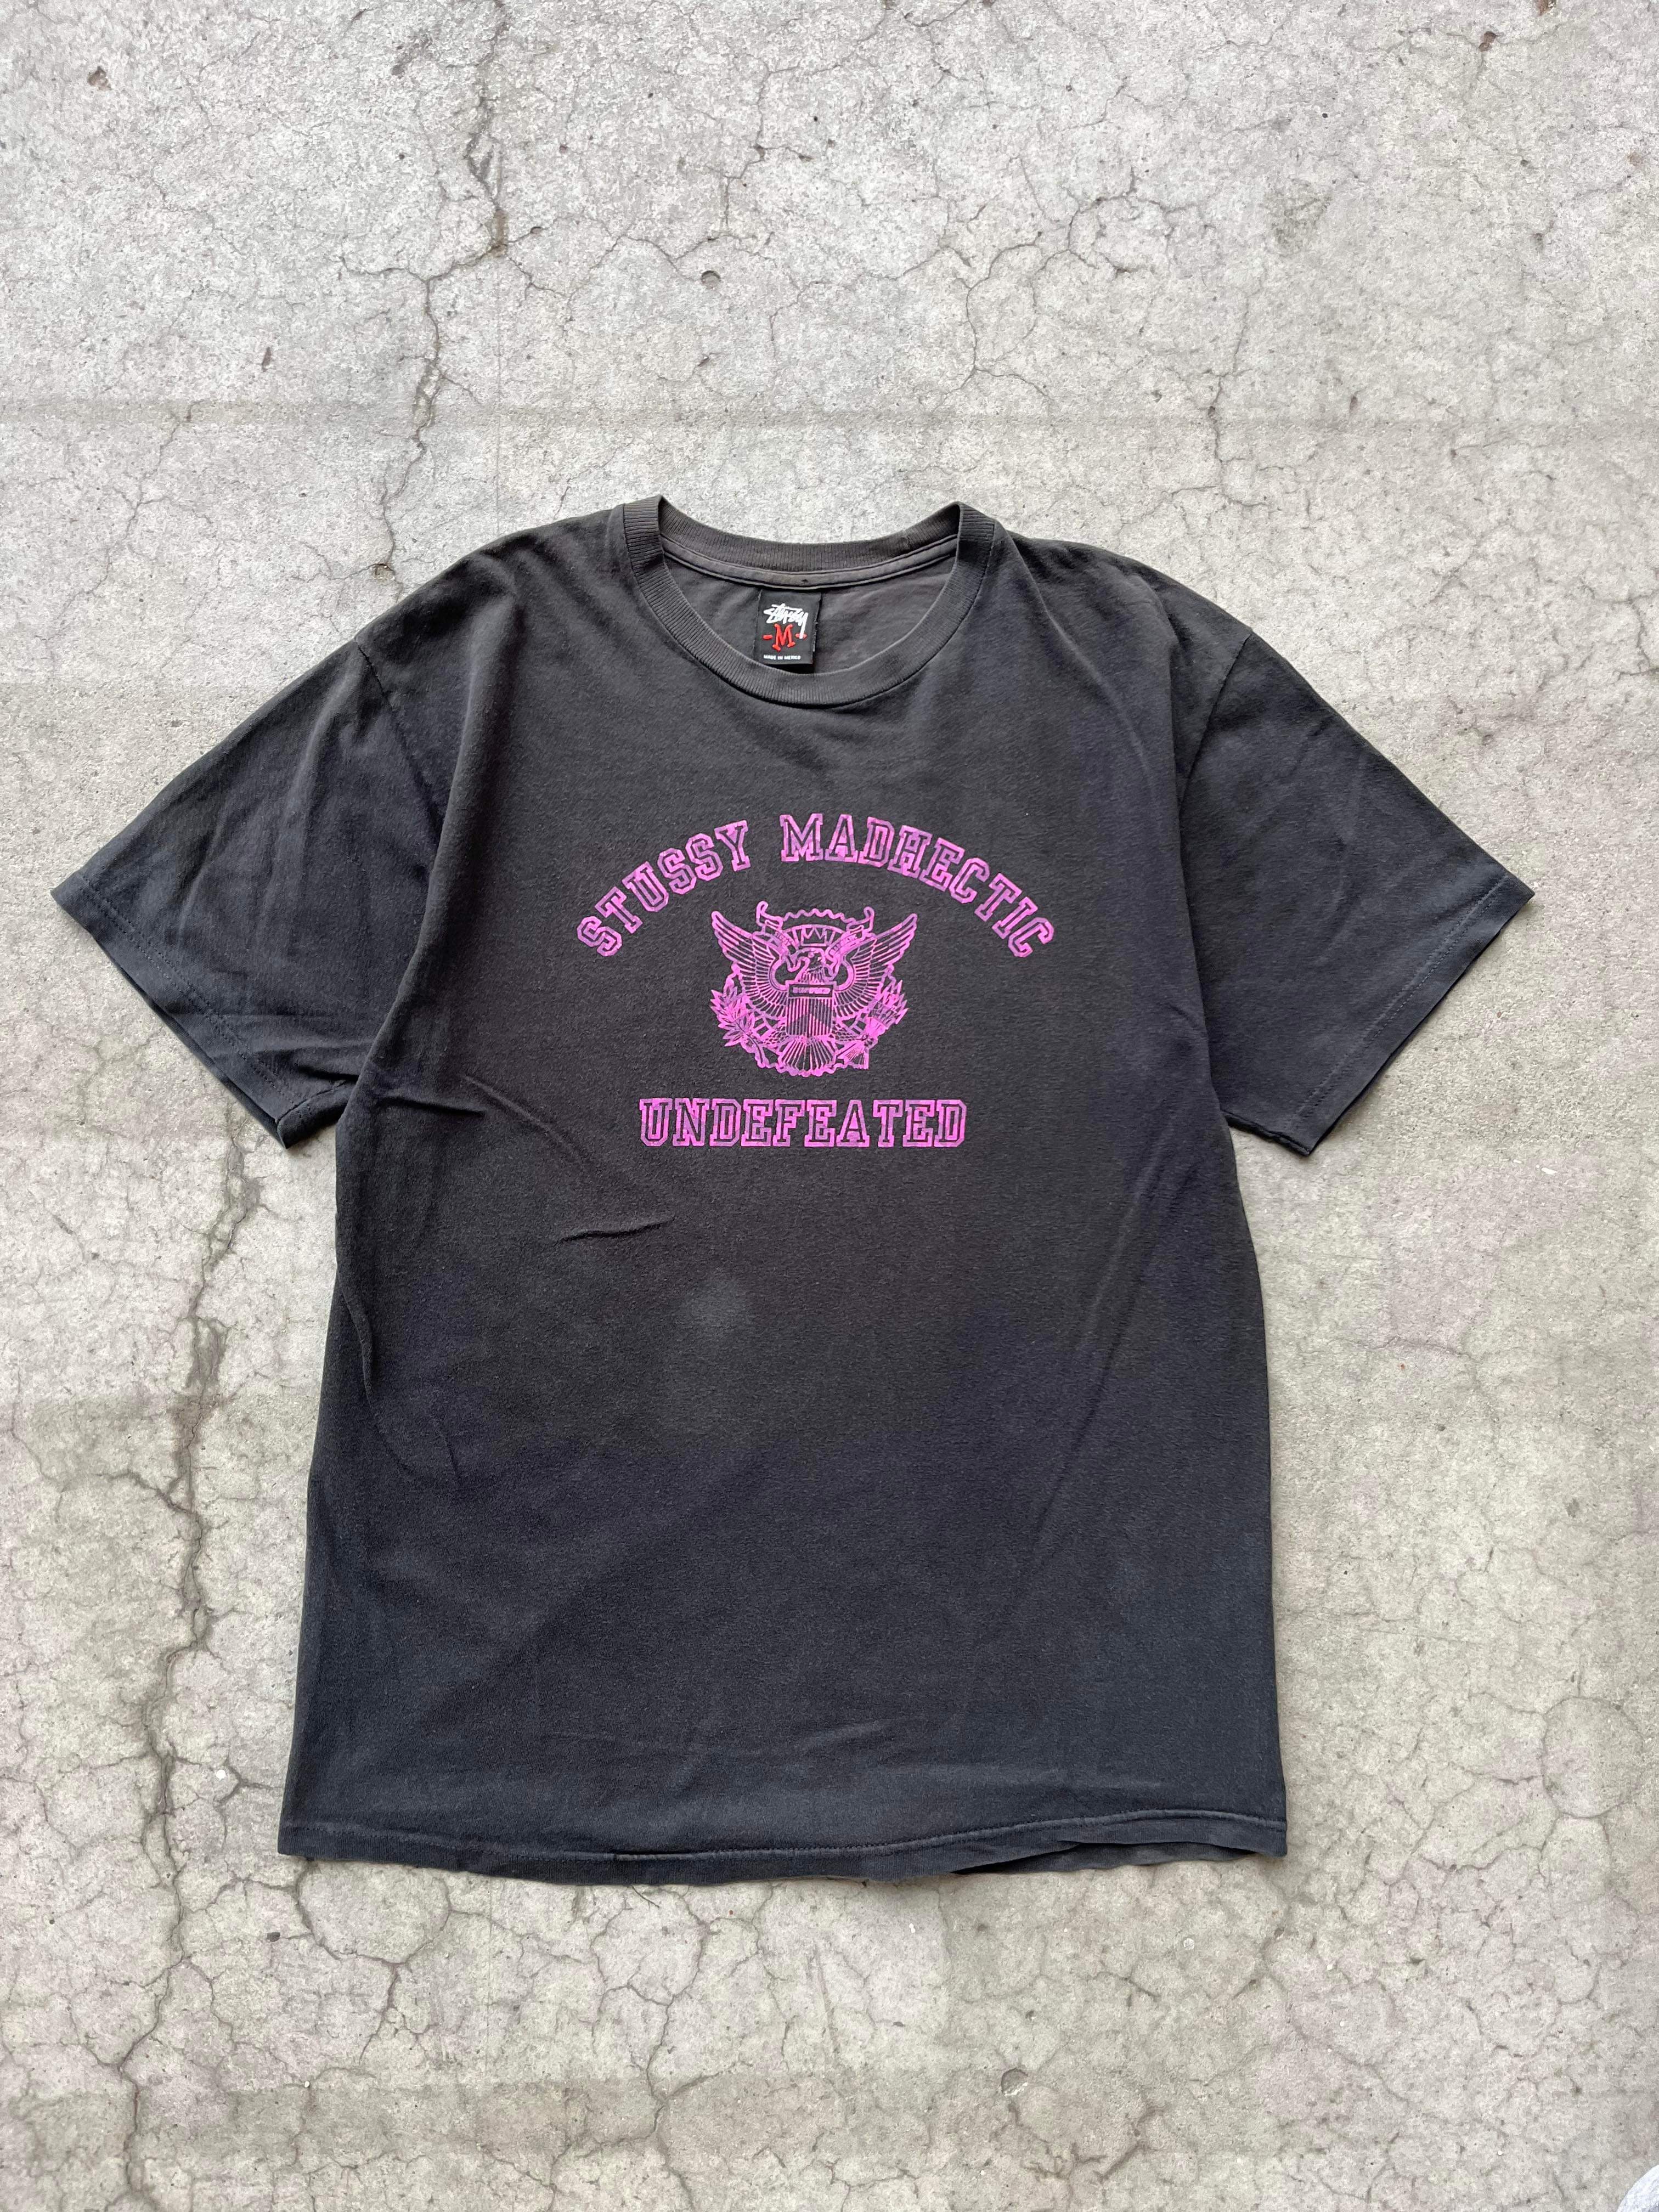 (M/L) Stussy x Madhectic x Undefeated Tee